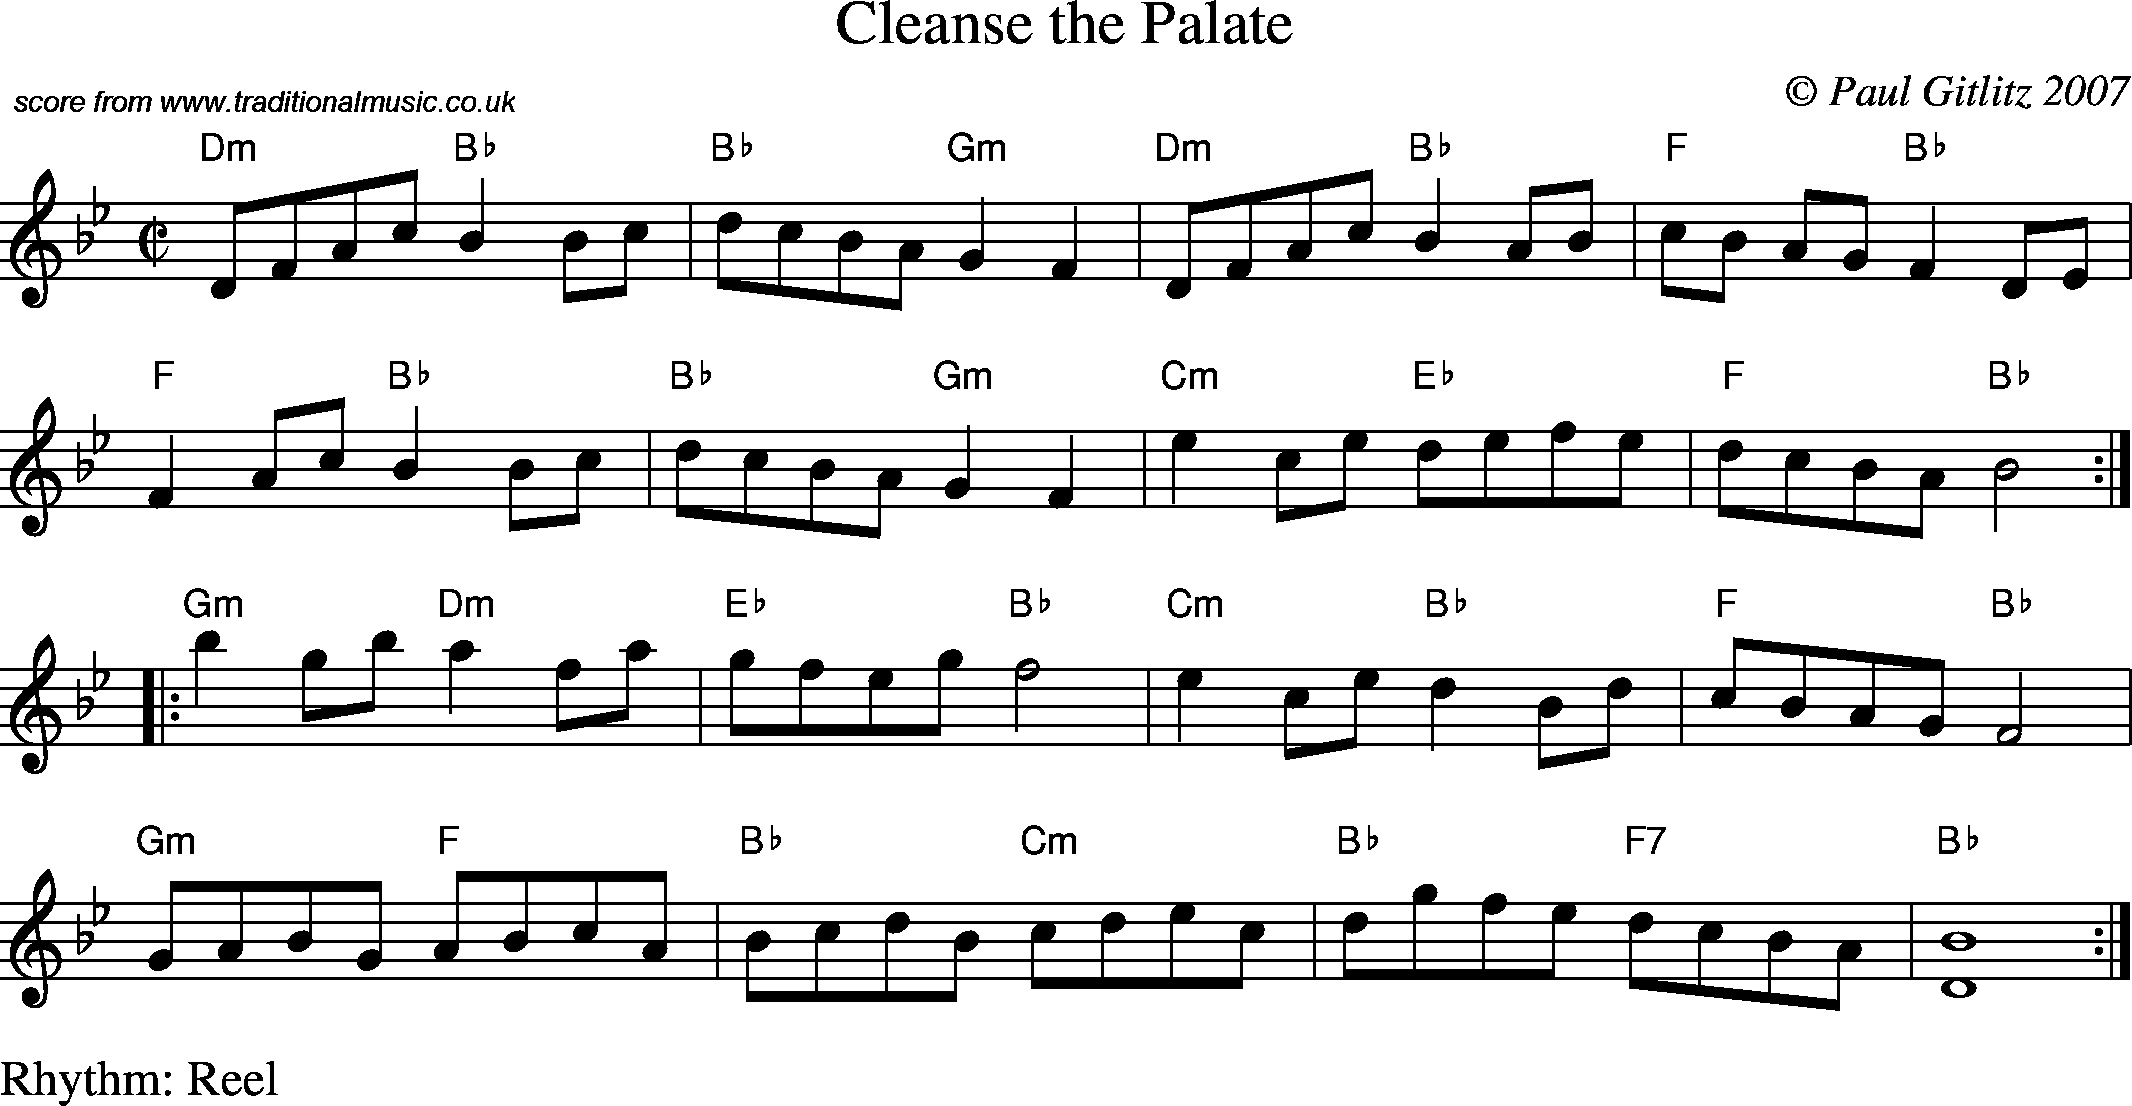 Sheet Music Score for Reel - Cleanse the Palate